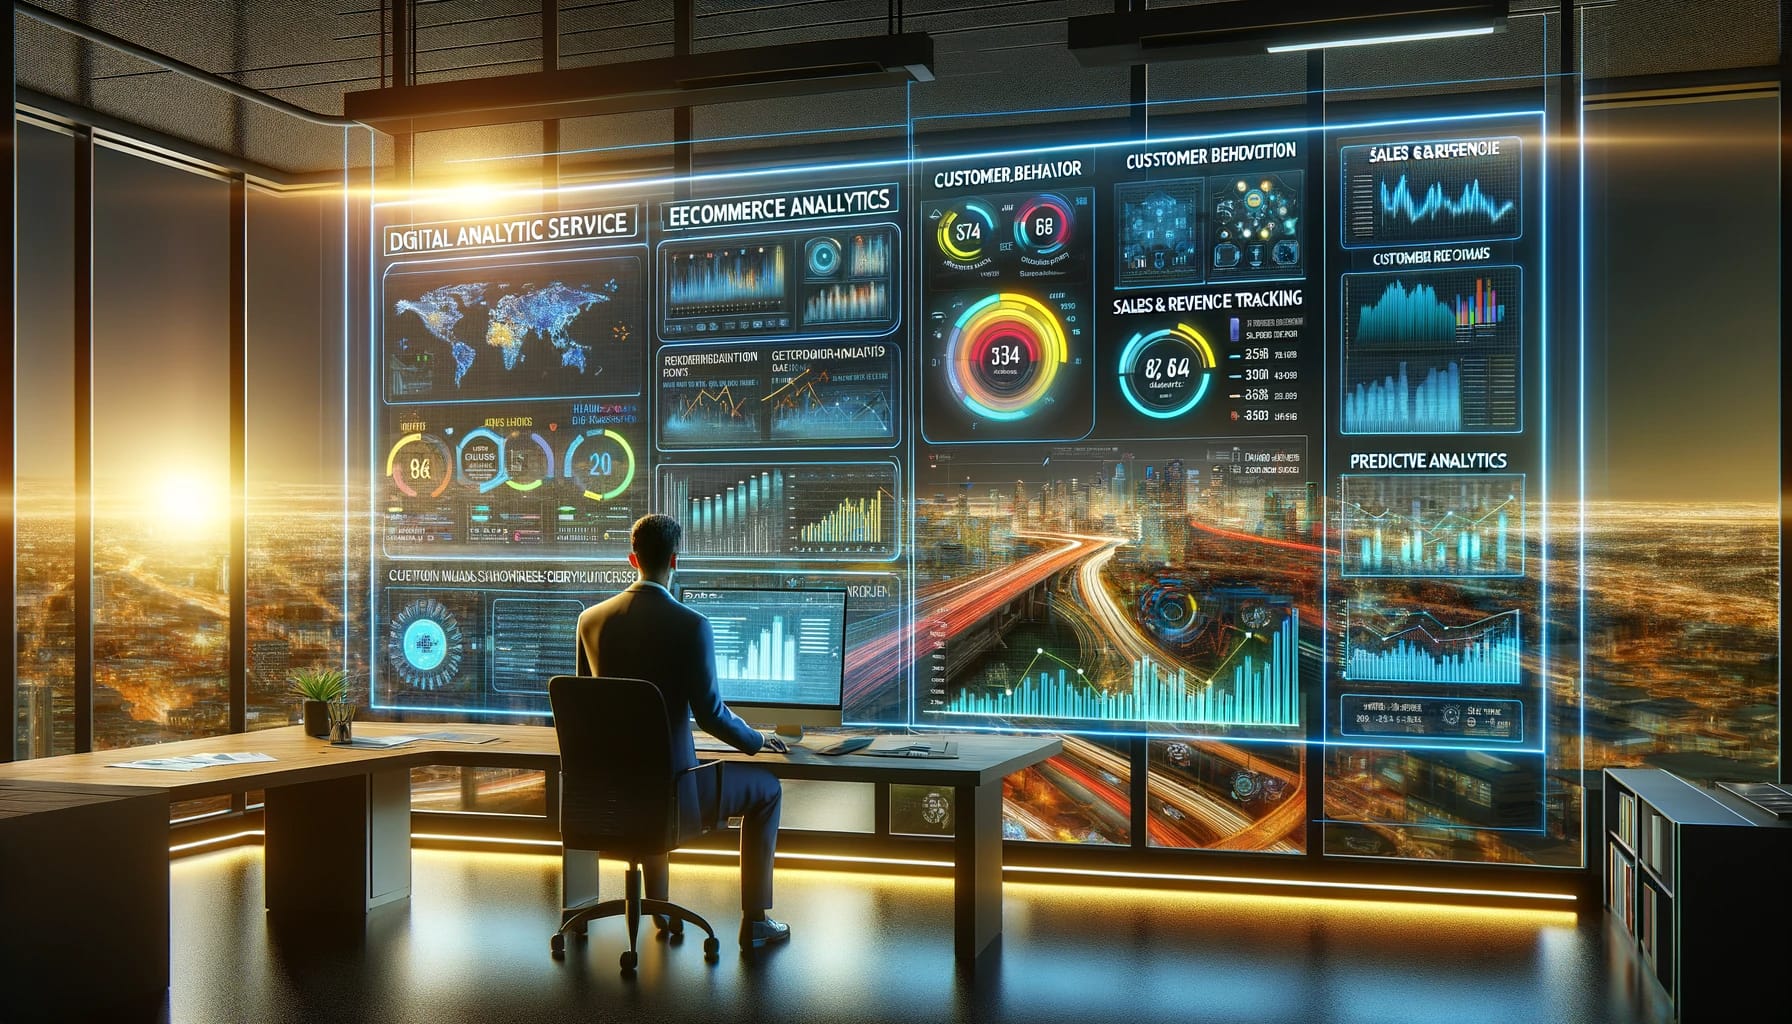 Dynamic image of an Ecommerce Analytics Service command center with a professional analyzing data on an interactive dashboard.